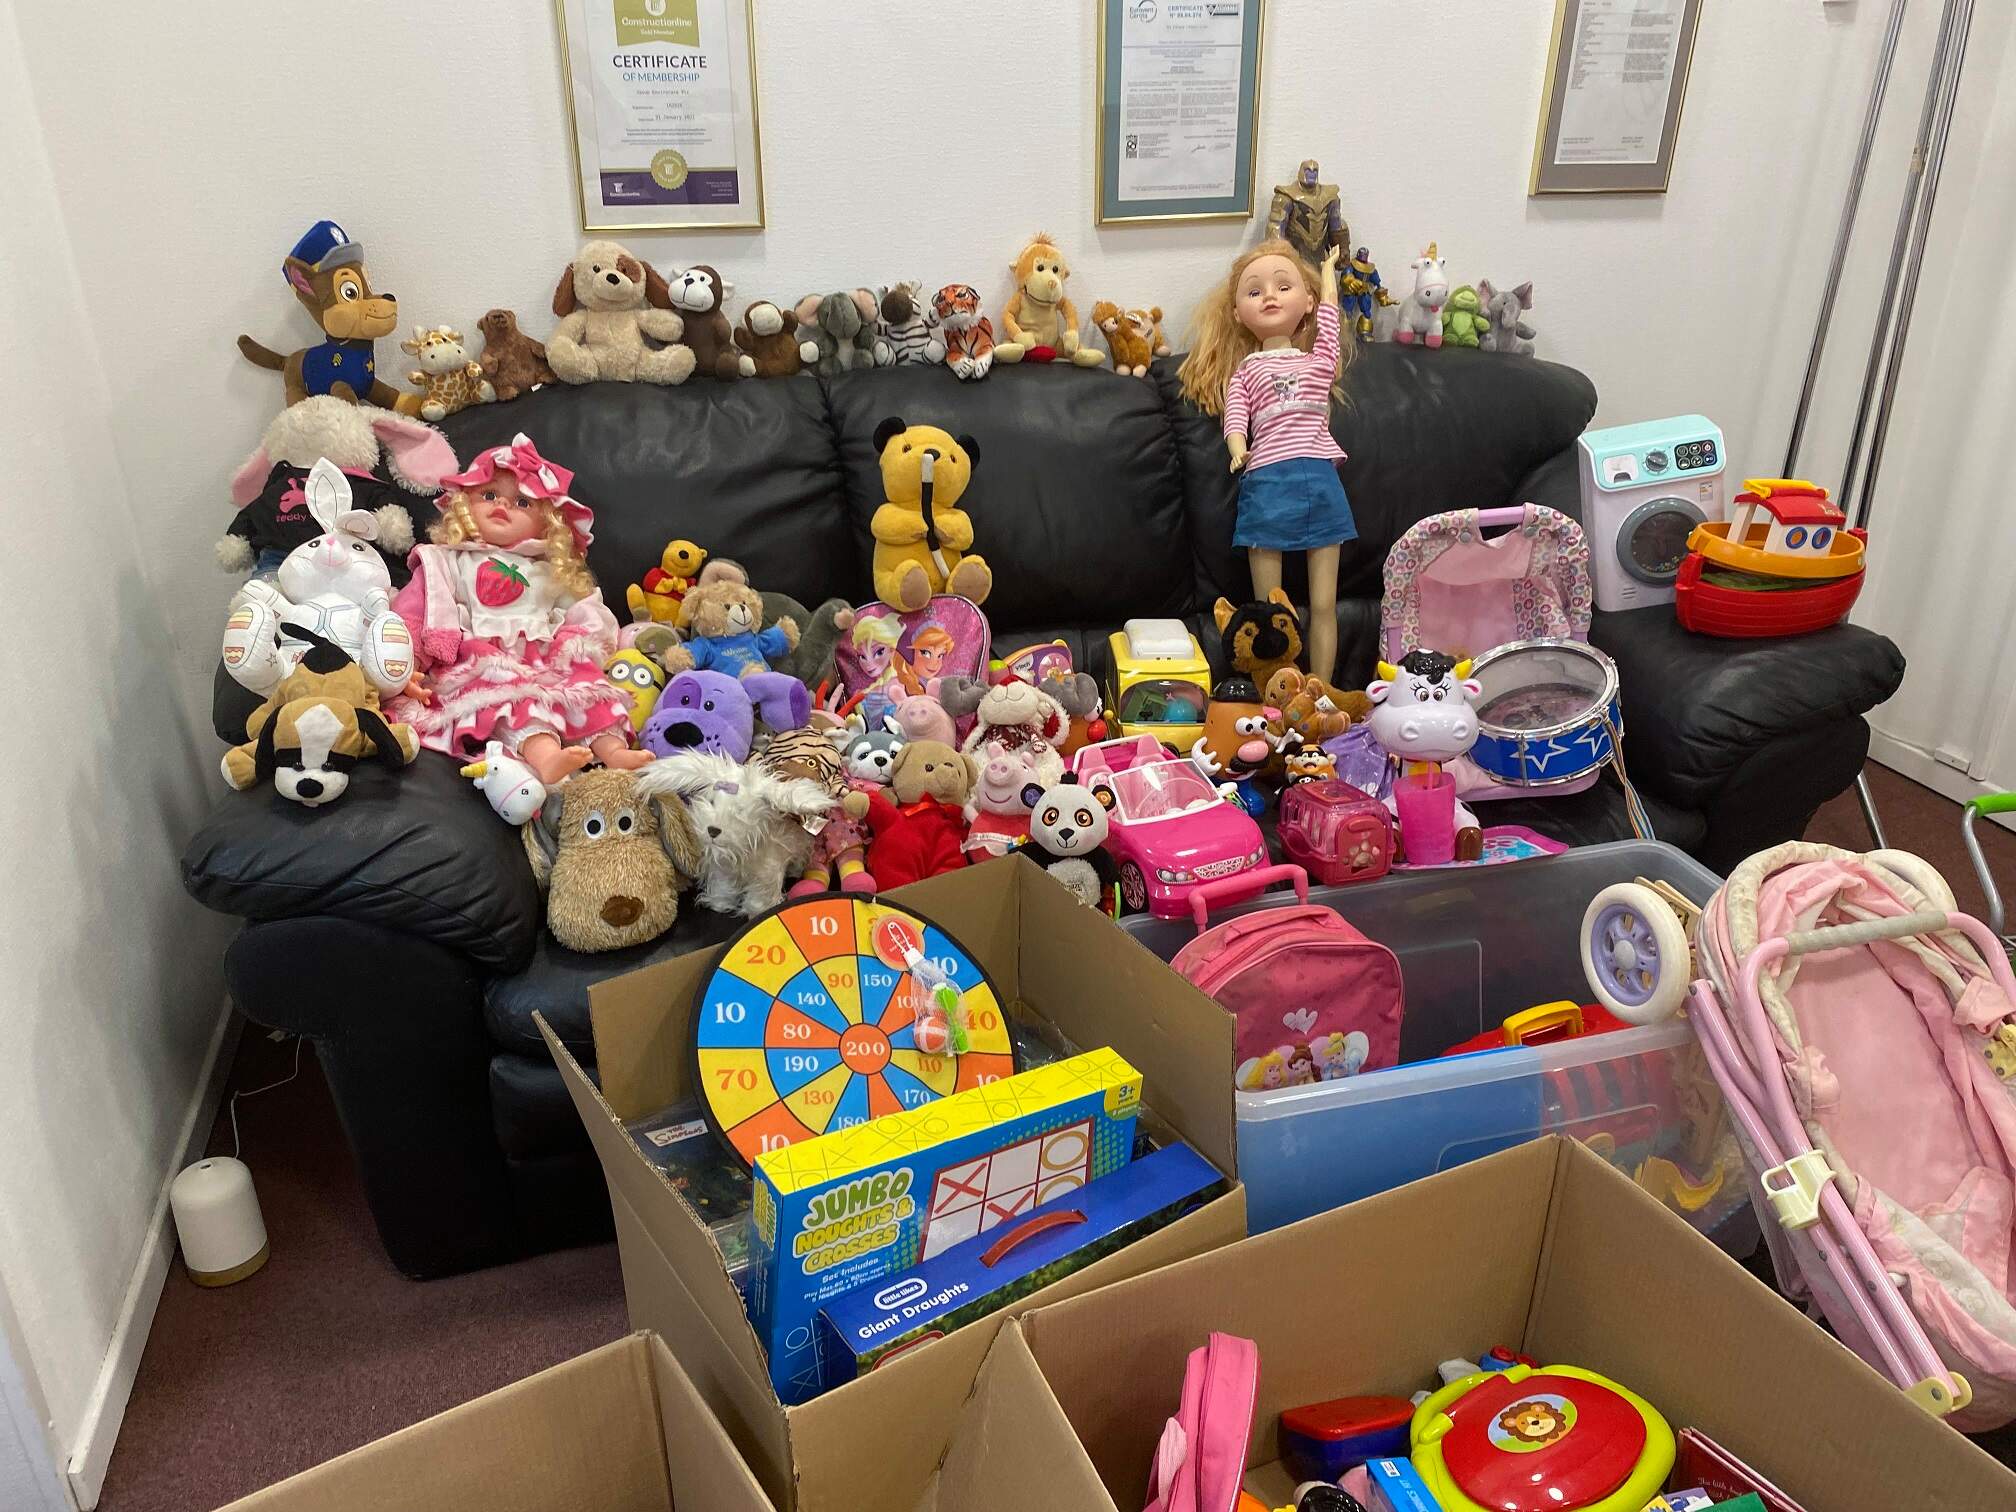 Toys donated by staff at Jasun Envirocare in aid of St Mary’s Church in Chedzoy and the Unicef Children of Ukraine Campaign.